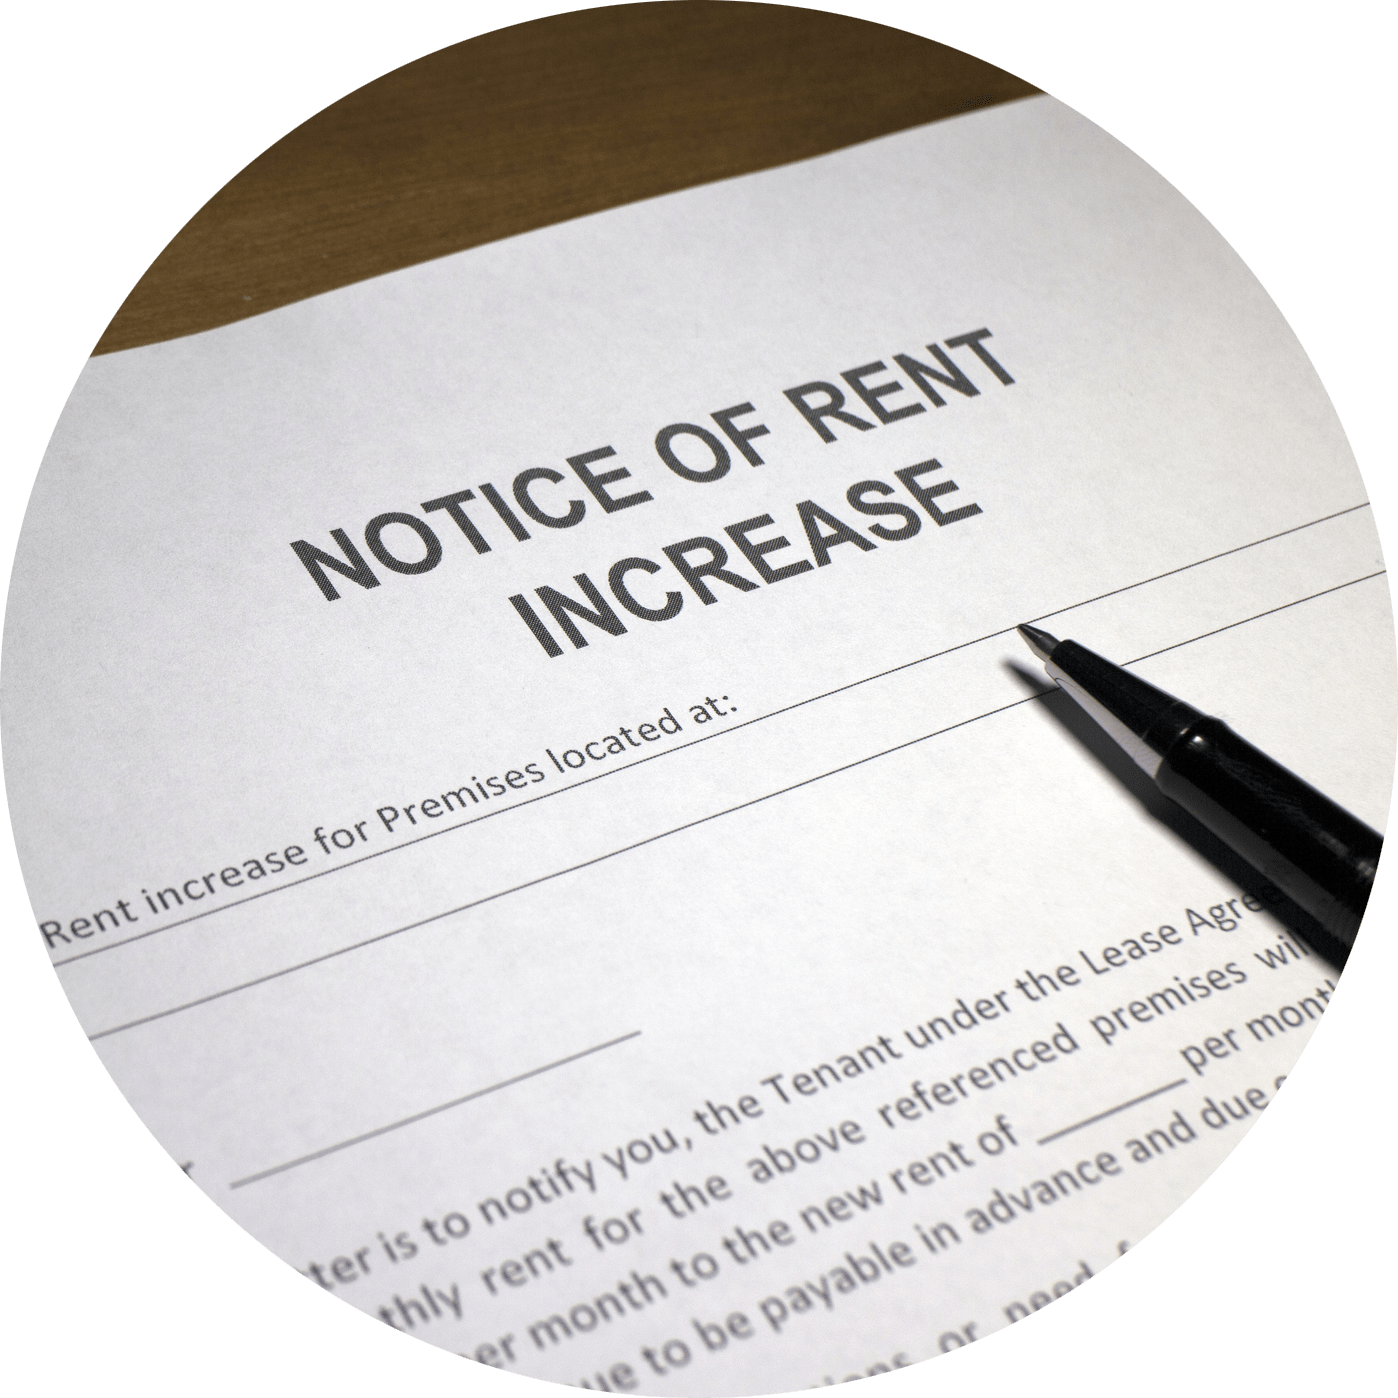 A piece of paper with the title "Notice of Rent Increase".